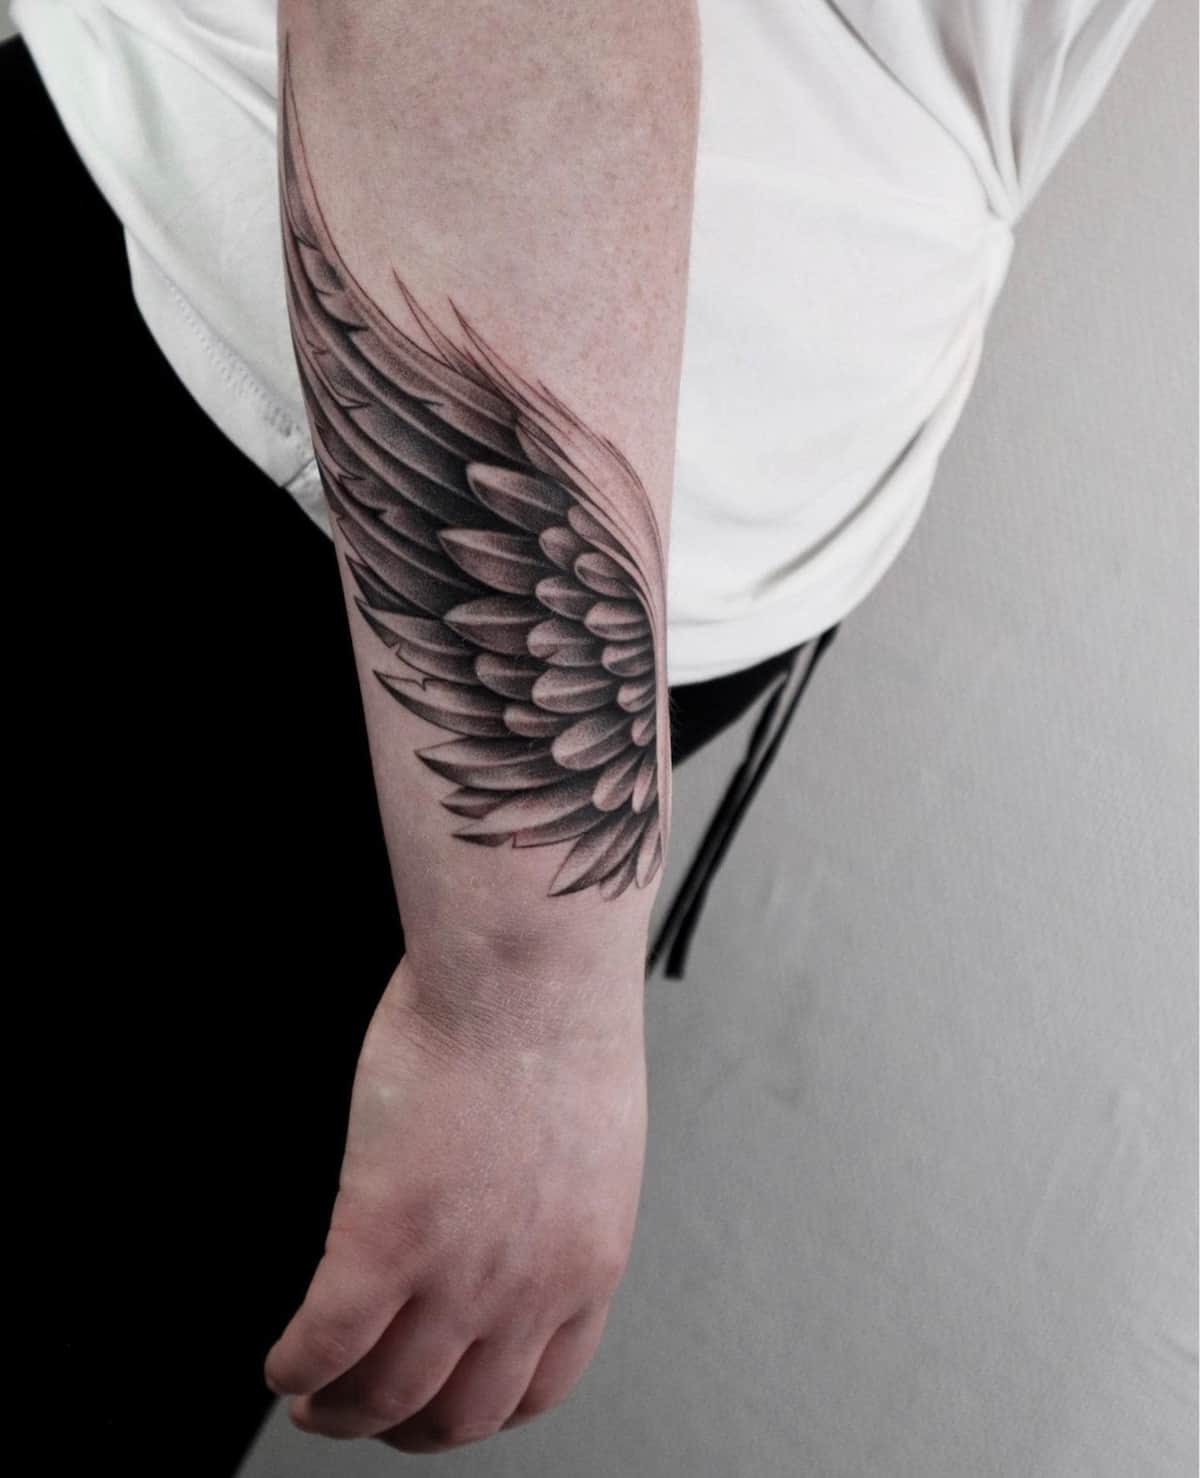 Black and white avatar wings tattoo on Craiyon